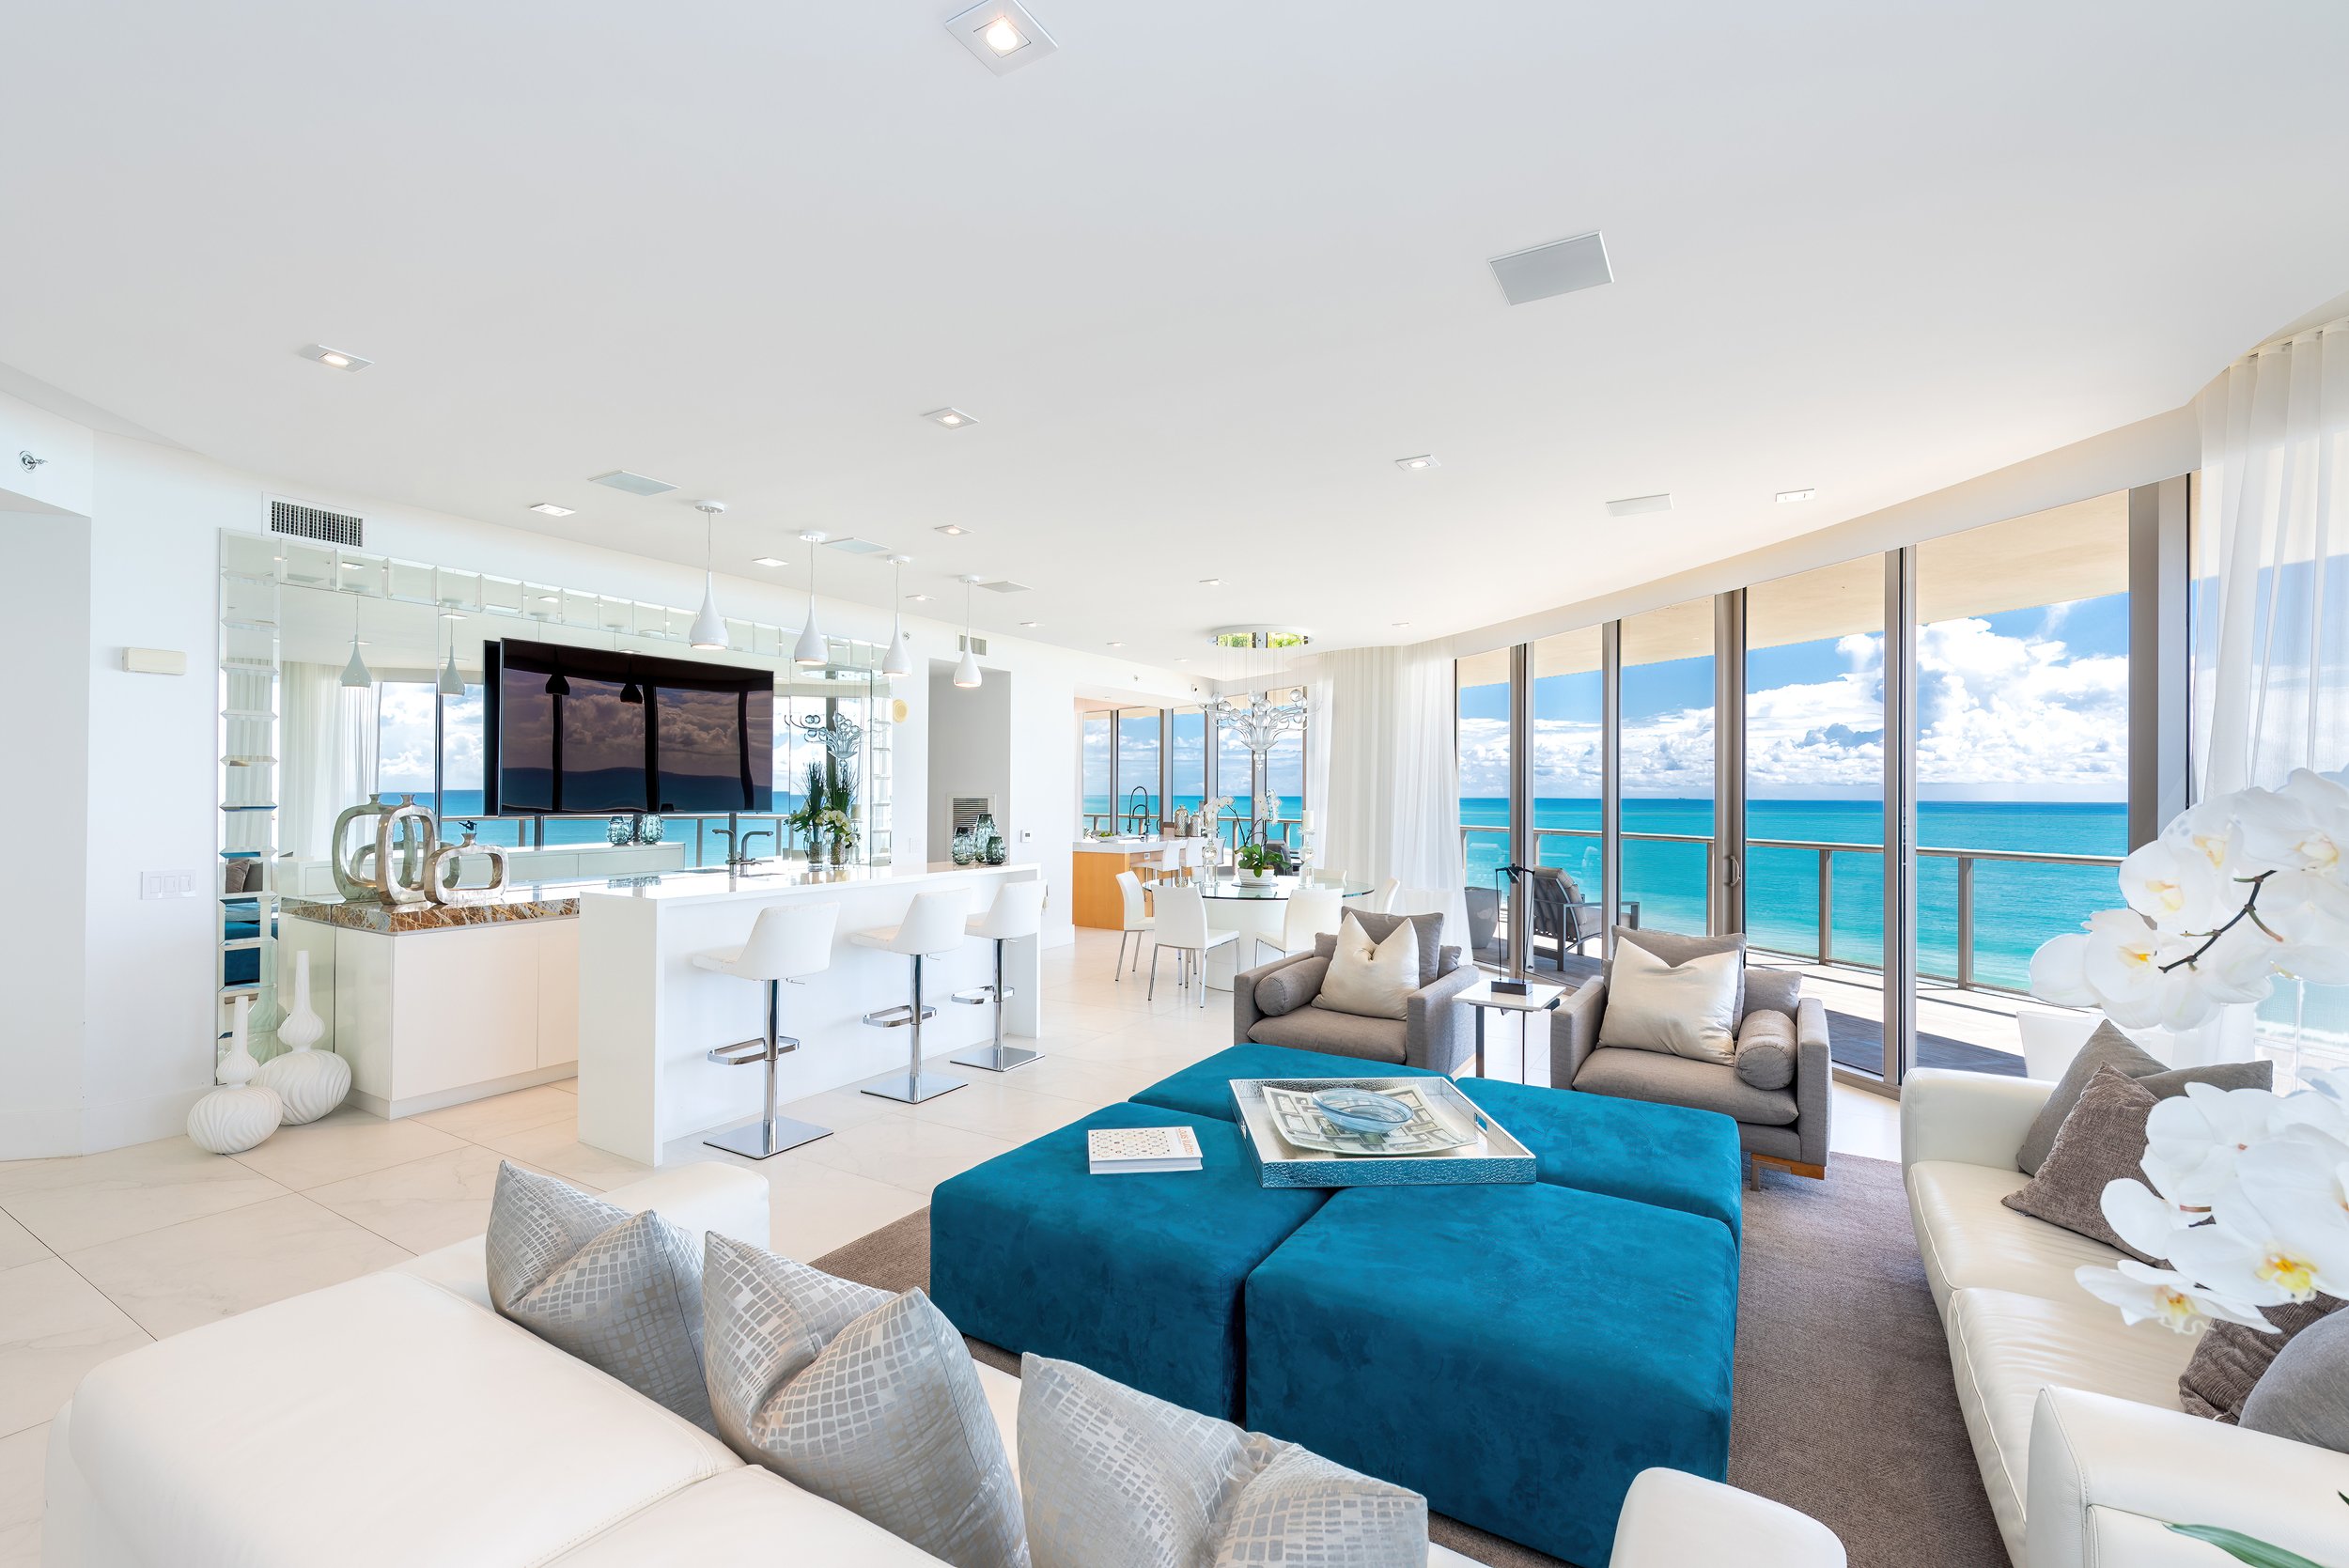 Master Brokers Forum Listing: See The Views From This Beachfront Condo In St. Regis Bal Harbour Asking $10.995 Million 11.JPG